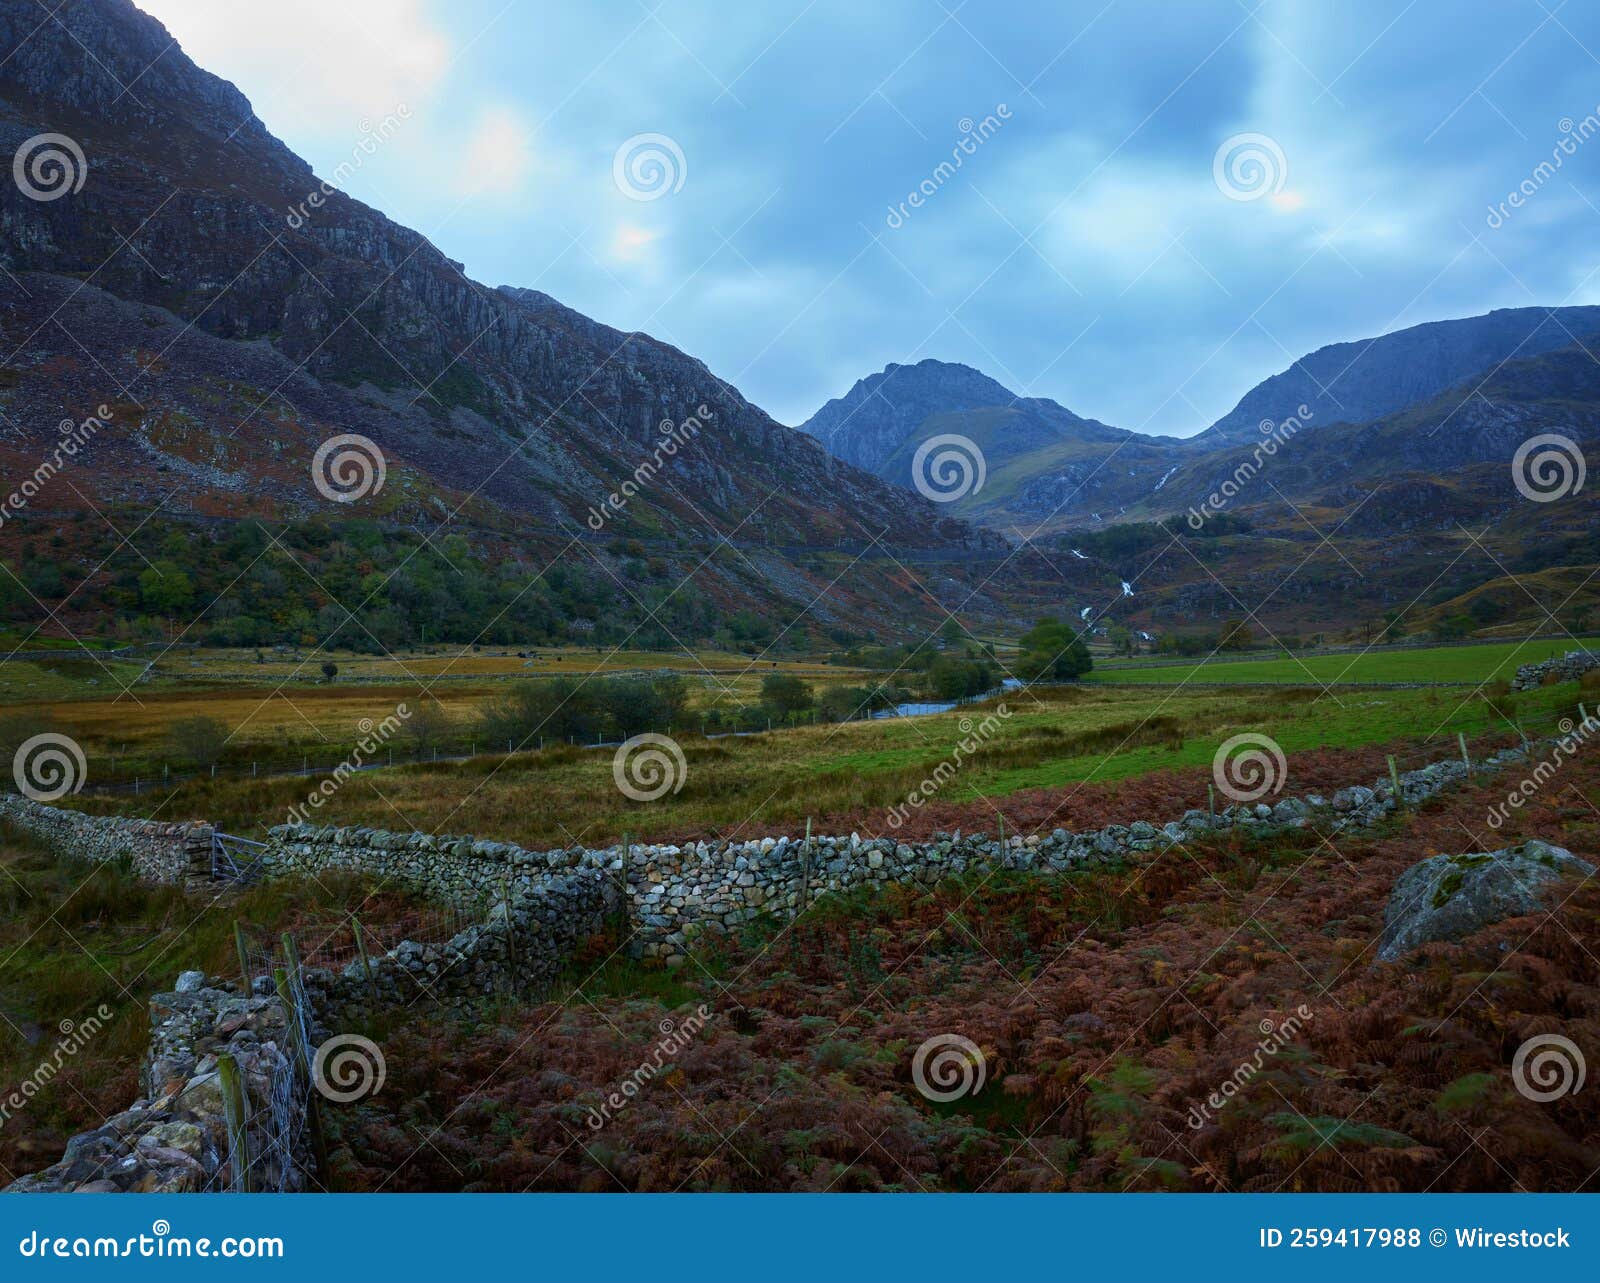 rural area at maes caradoc, surrounded by stone fences and rocky mountains in north wales